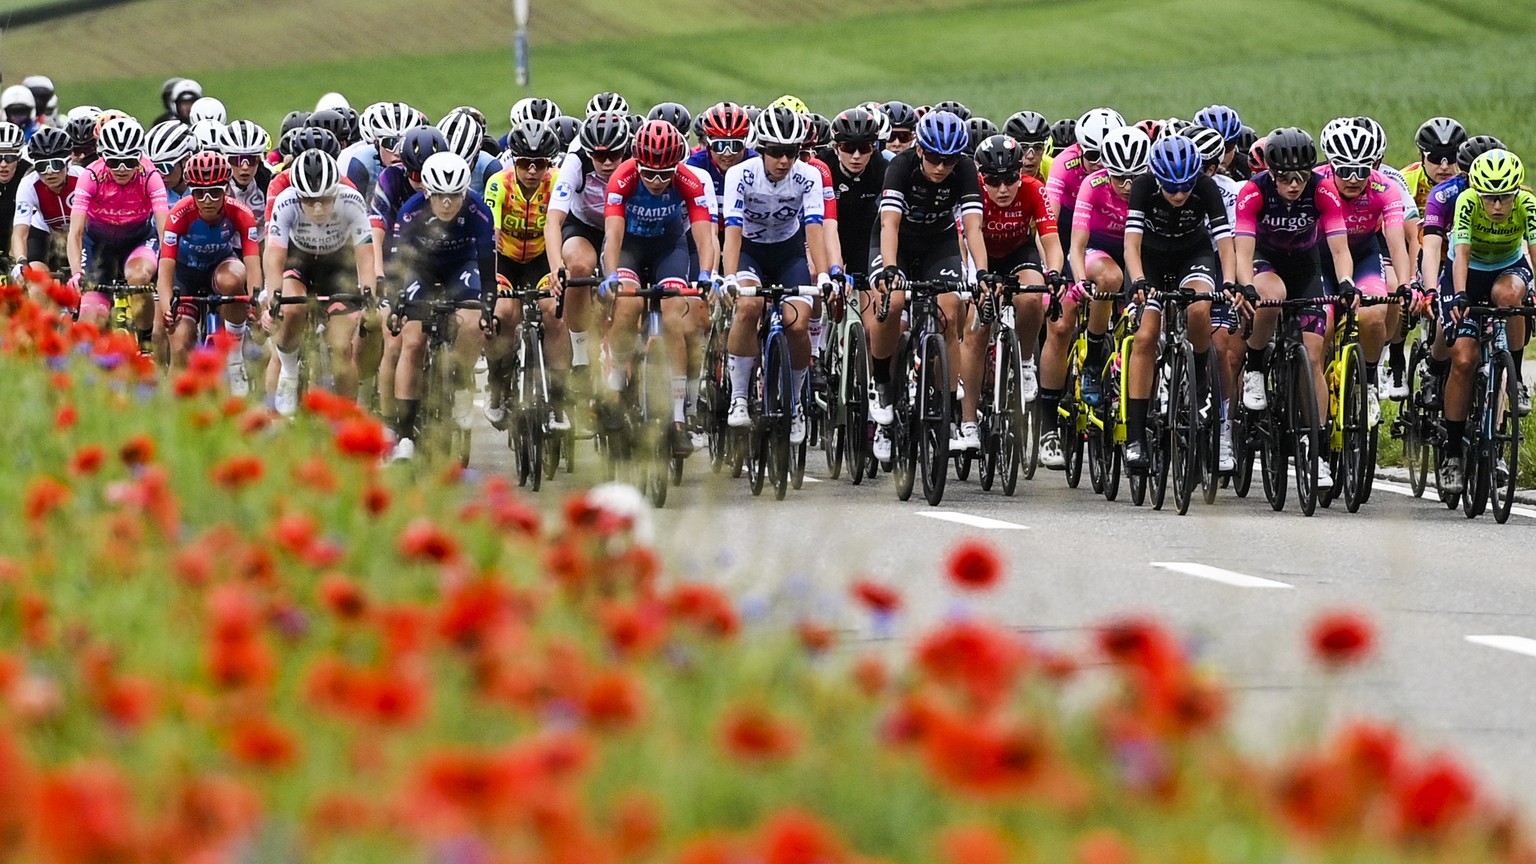 The peloton during the first stage, a 114 km race with start and finish in Frauenfeld, Switzerland, at the 1st Tour de Suisse UCI ProTour cycling women